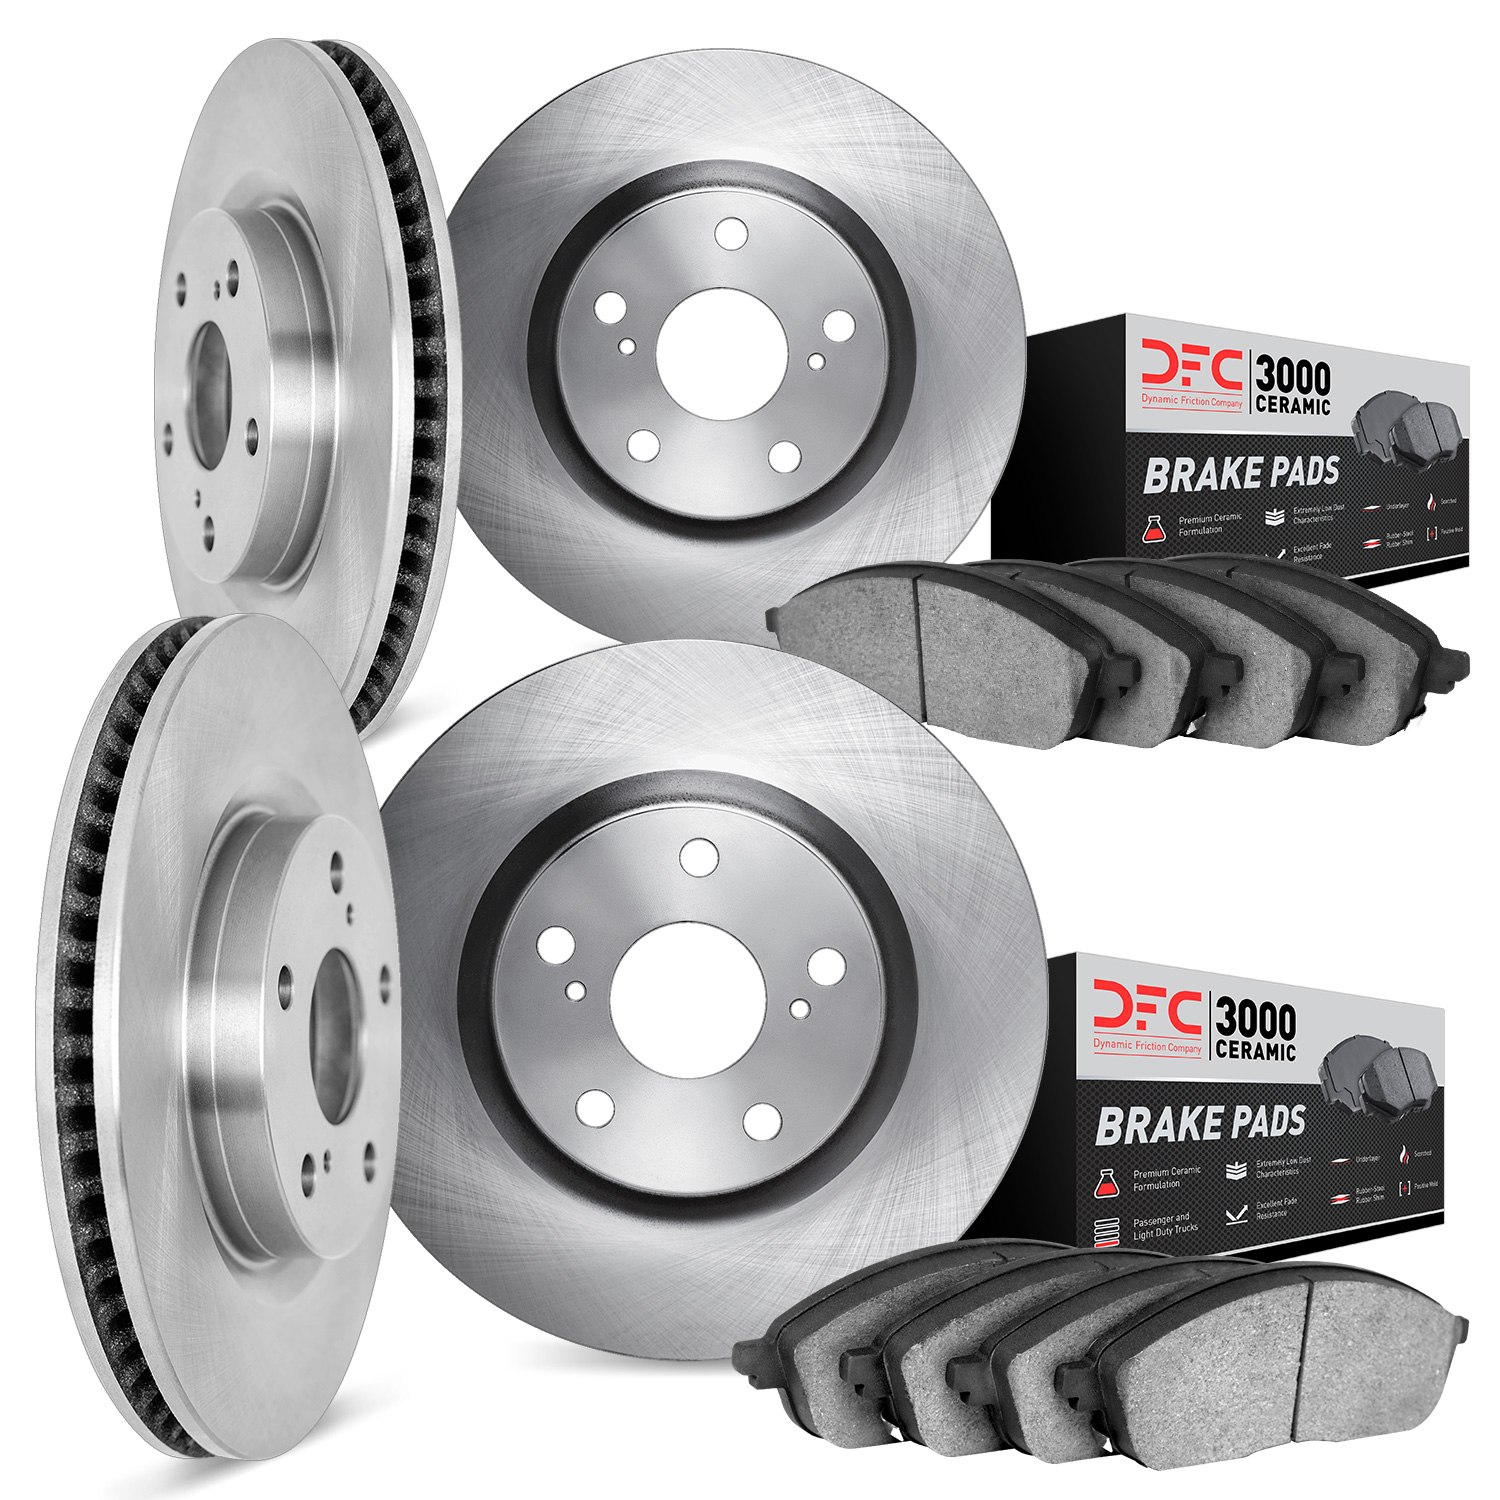 6304-75019 Brake Rotors with 3000-Series Ceramic Brake Pads Kit, 2014-2015 Lexus/Toyota/Scion, Position: Front and Rear